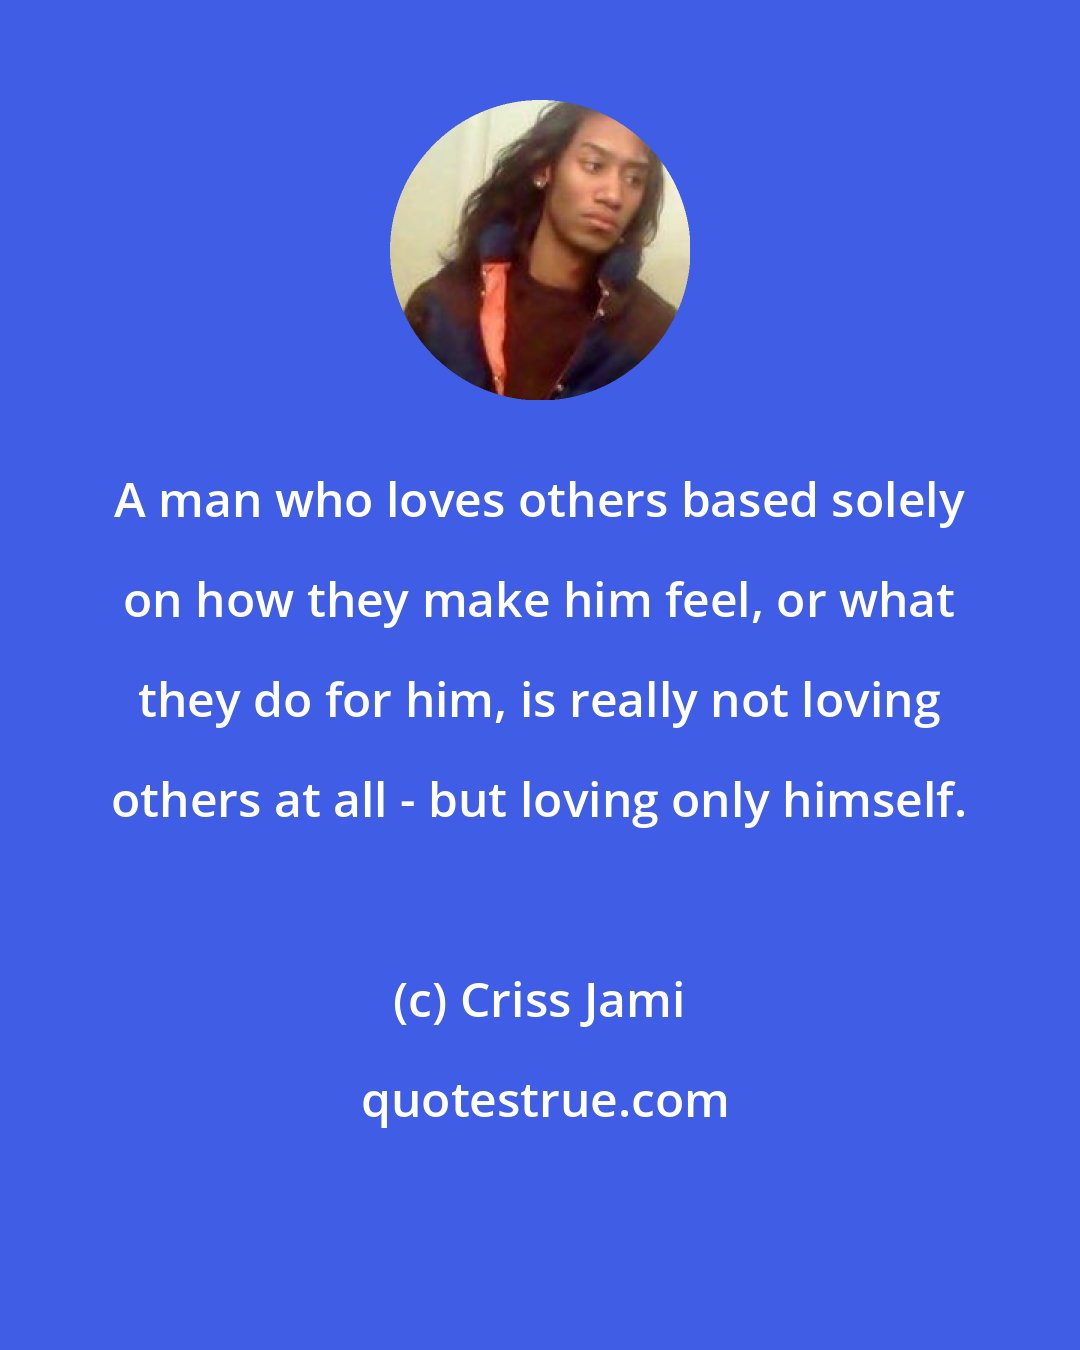 Criss Jami: A man who loves others based solely on how they make him feel, or what they do for him, is really not loving others at all - but loving only himself.